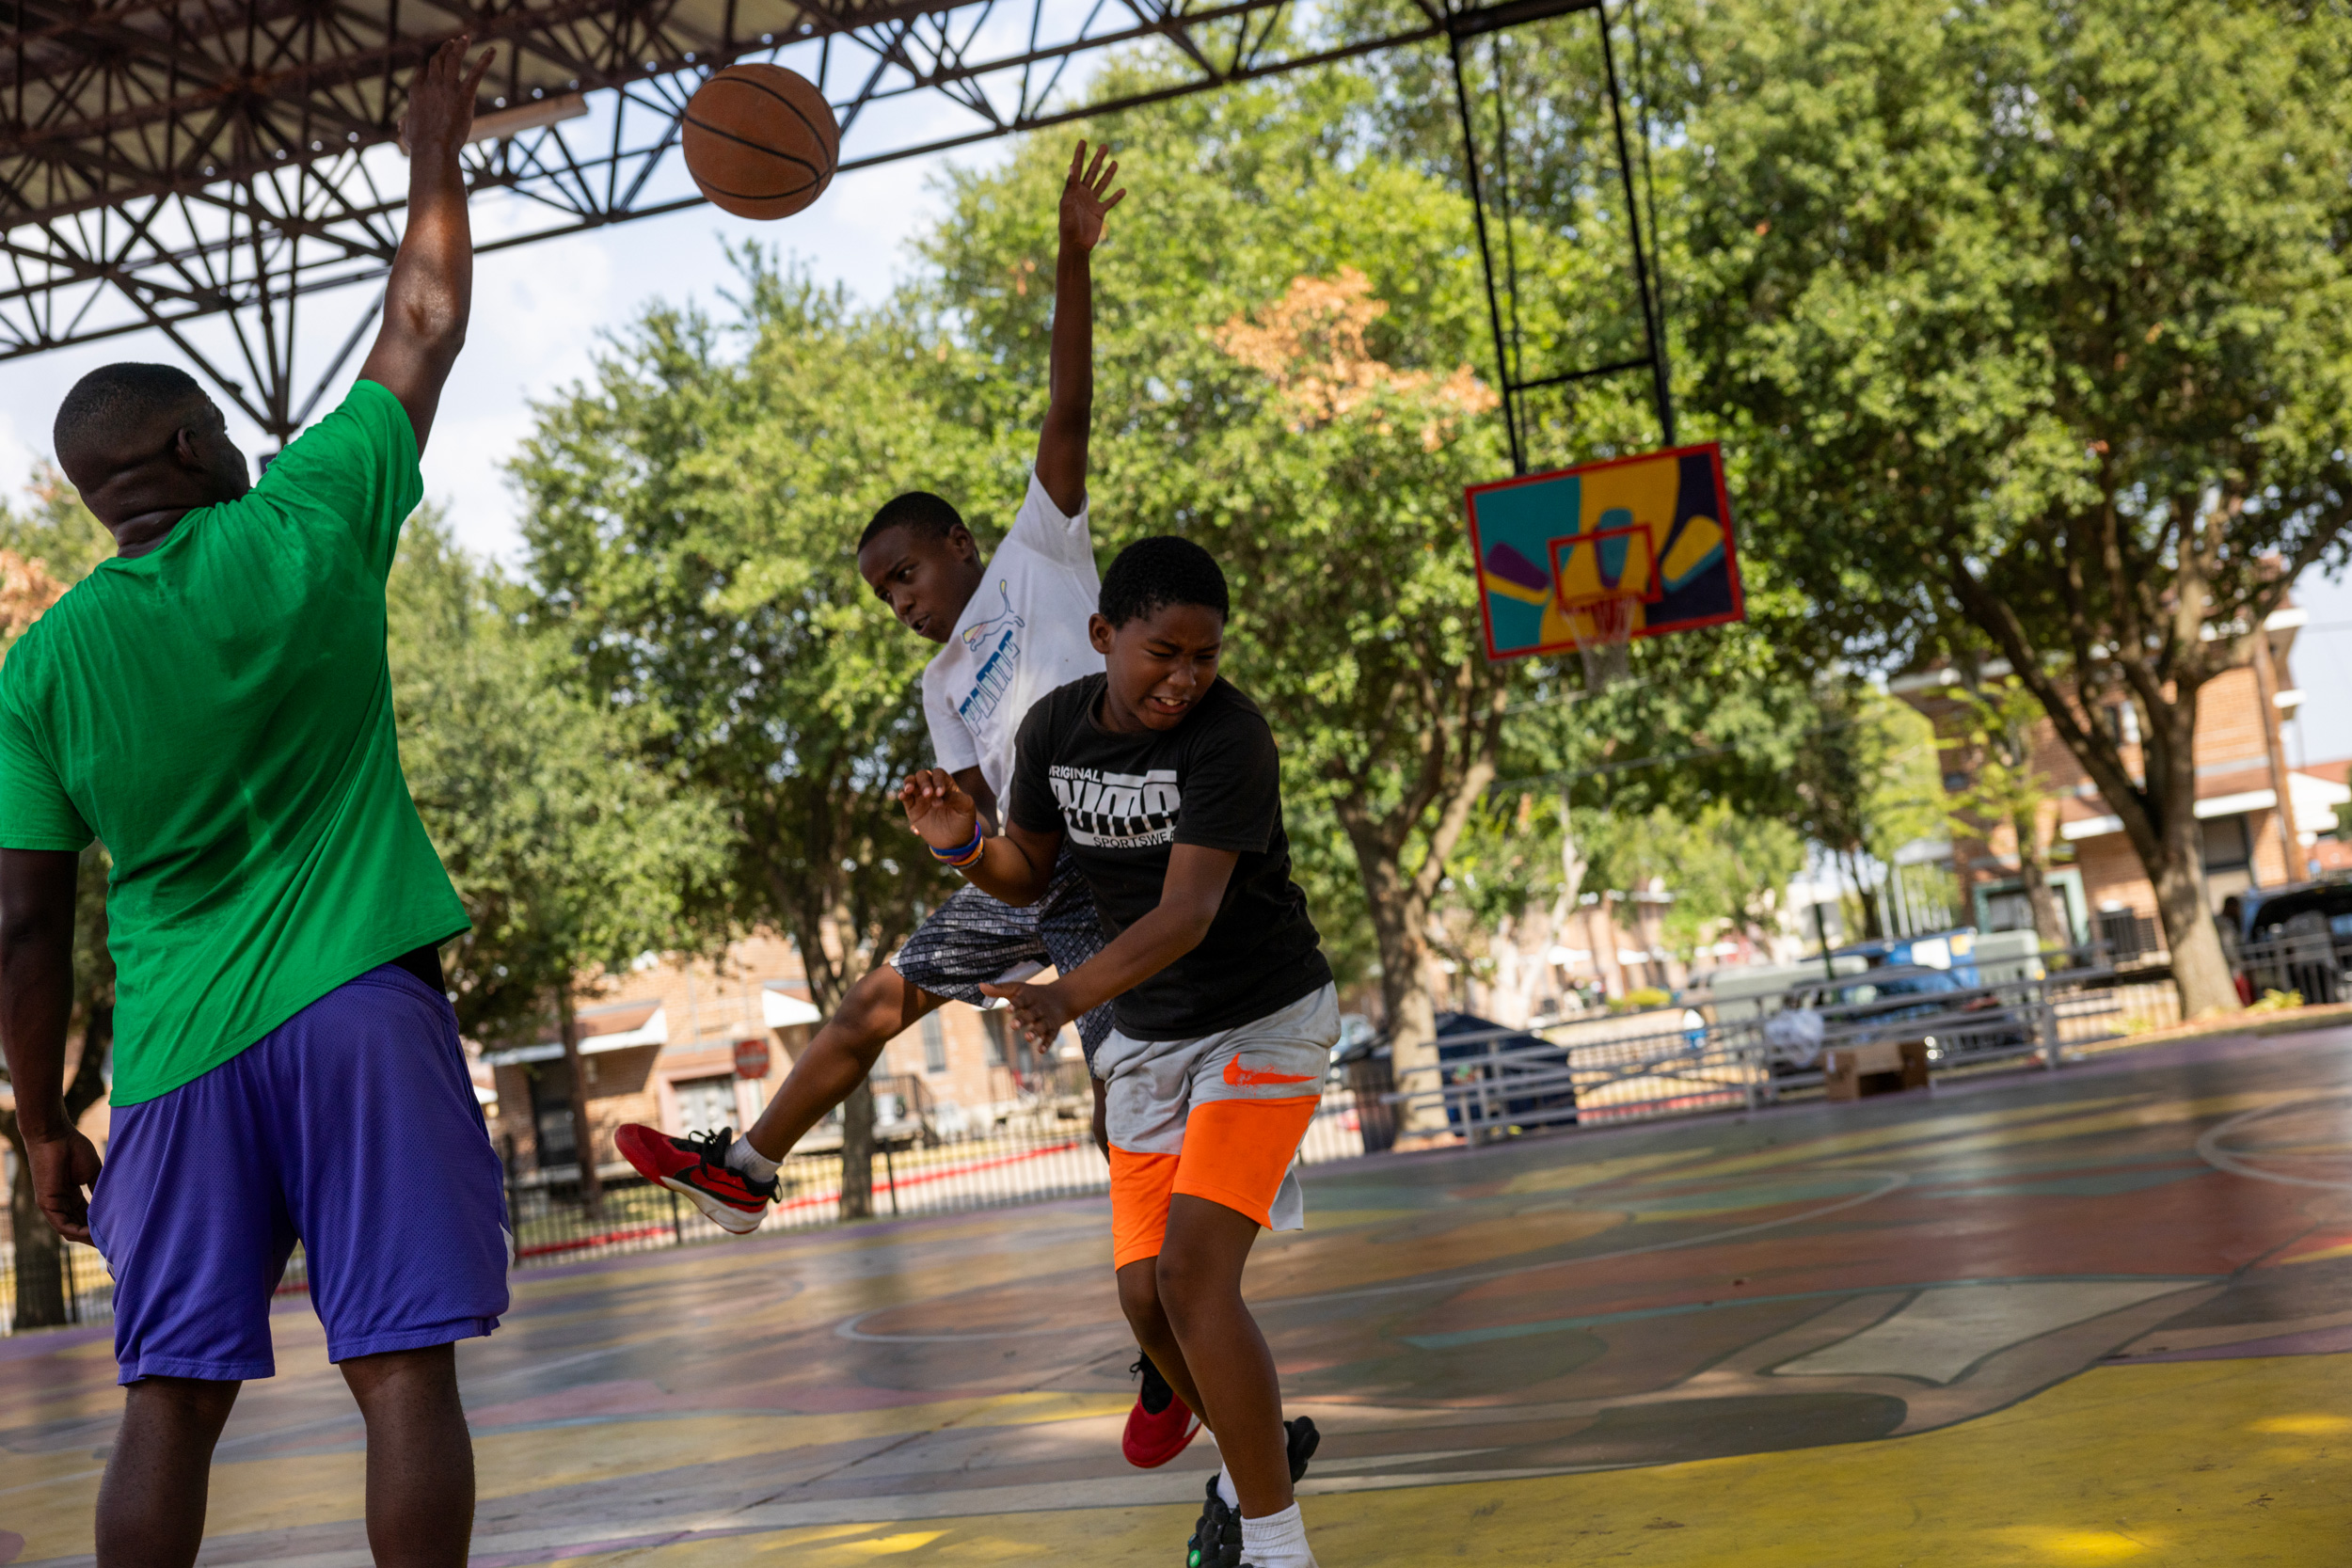 Queton Holloway and brothers Derion, 9, and Deshawen Christten, 10, play basketball late on a hot summer day.